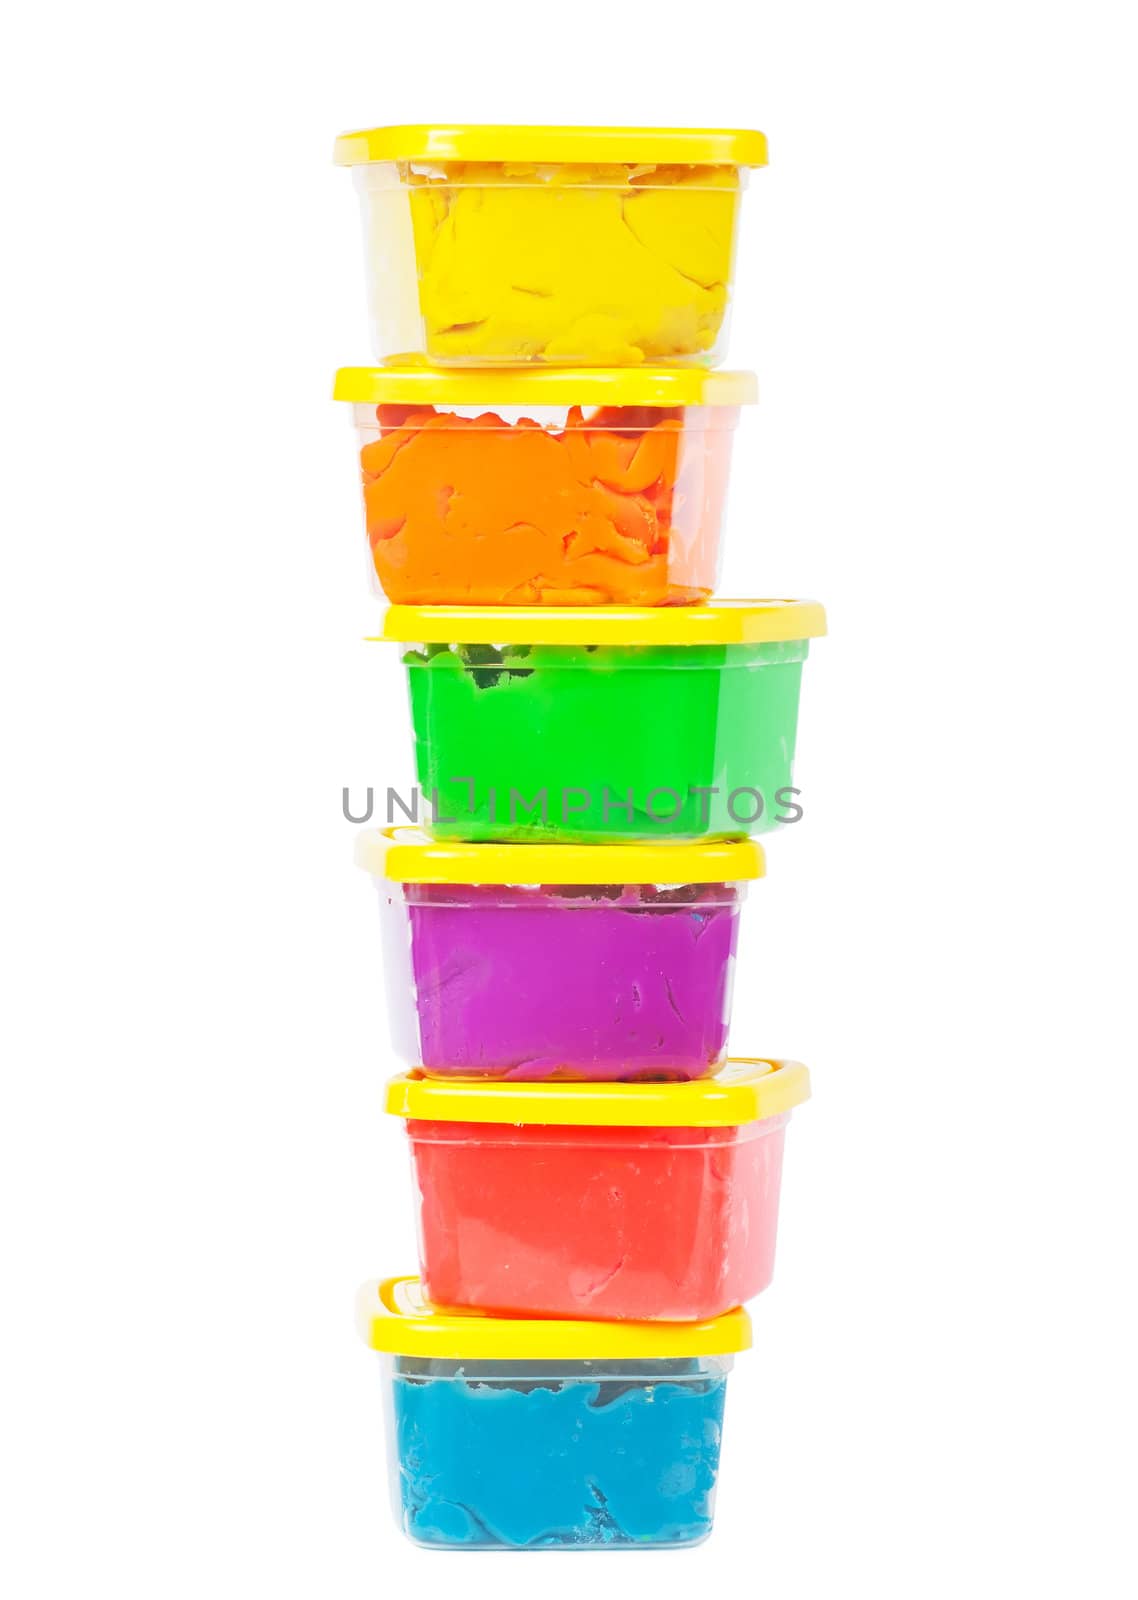 A stack of jars with plasticine of different colors